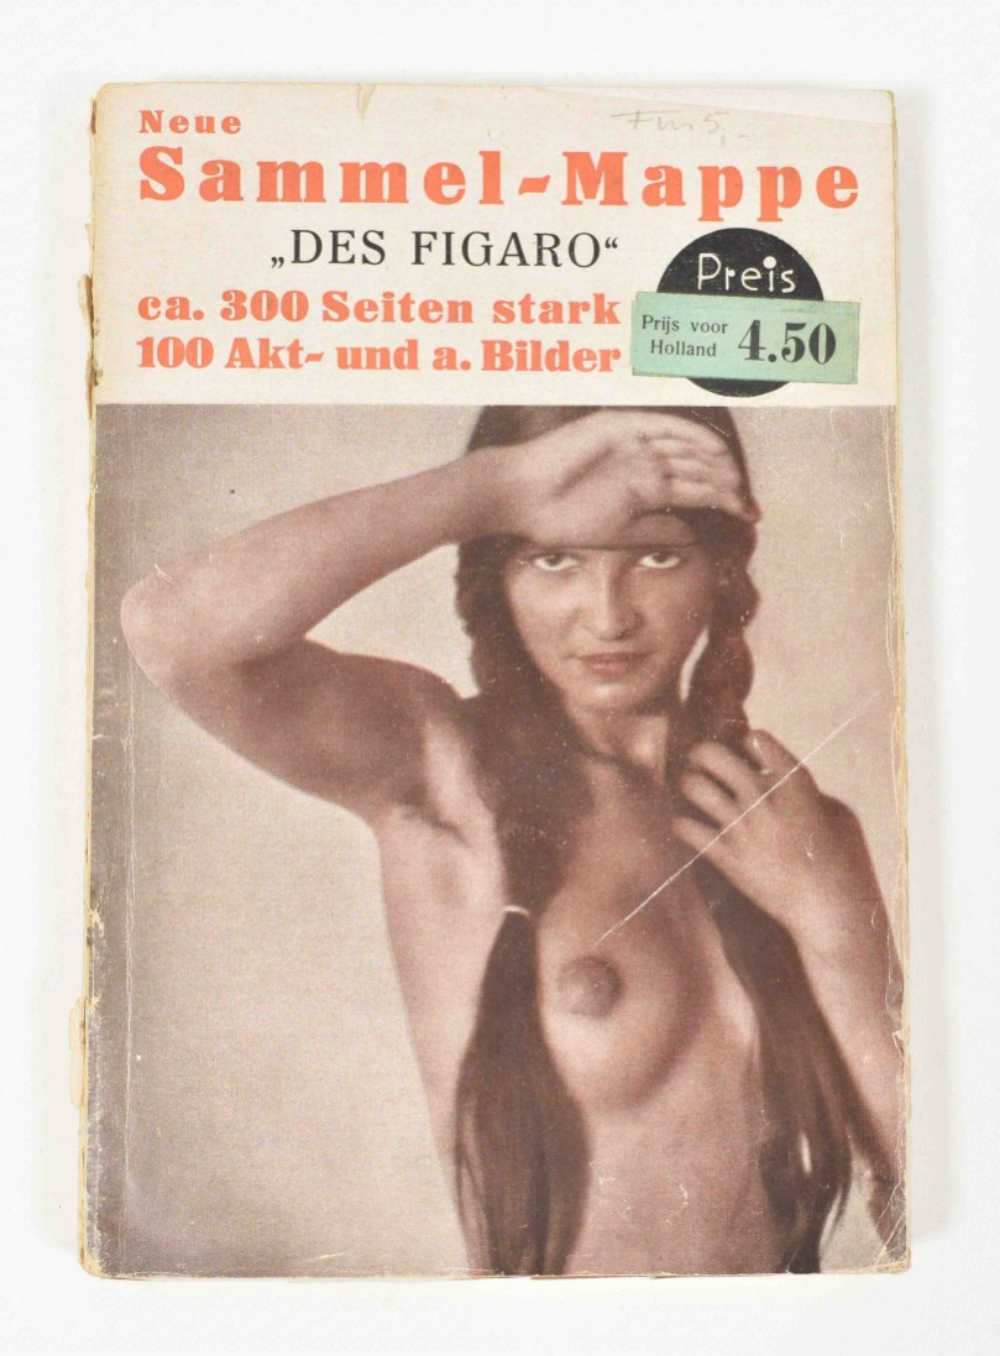 Collection of 10 vintage German erotic magazines - Image 6 of 8